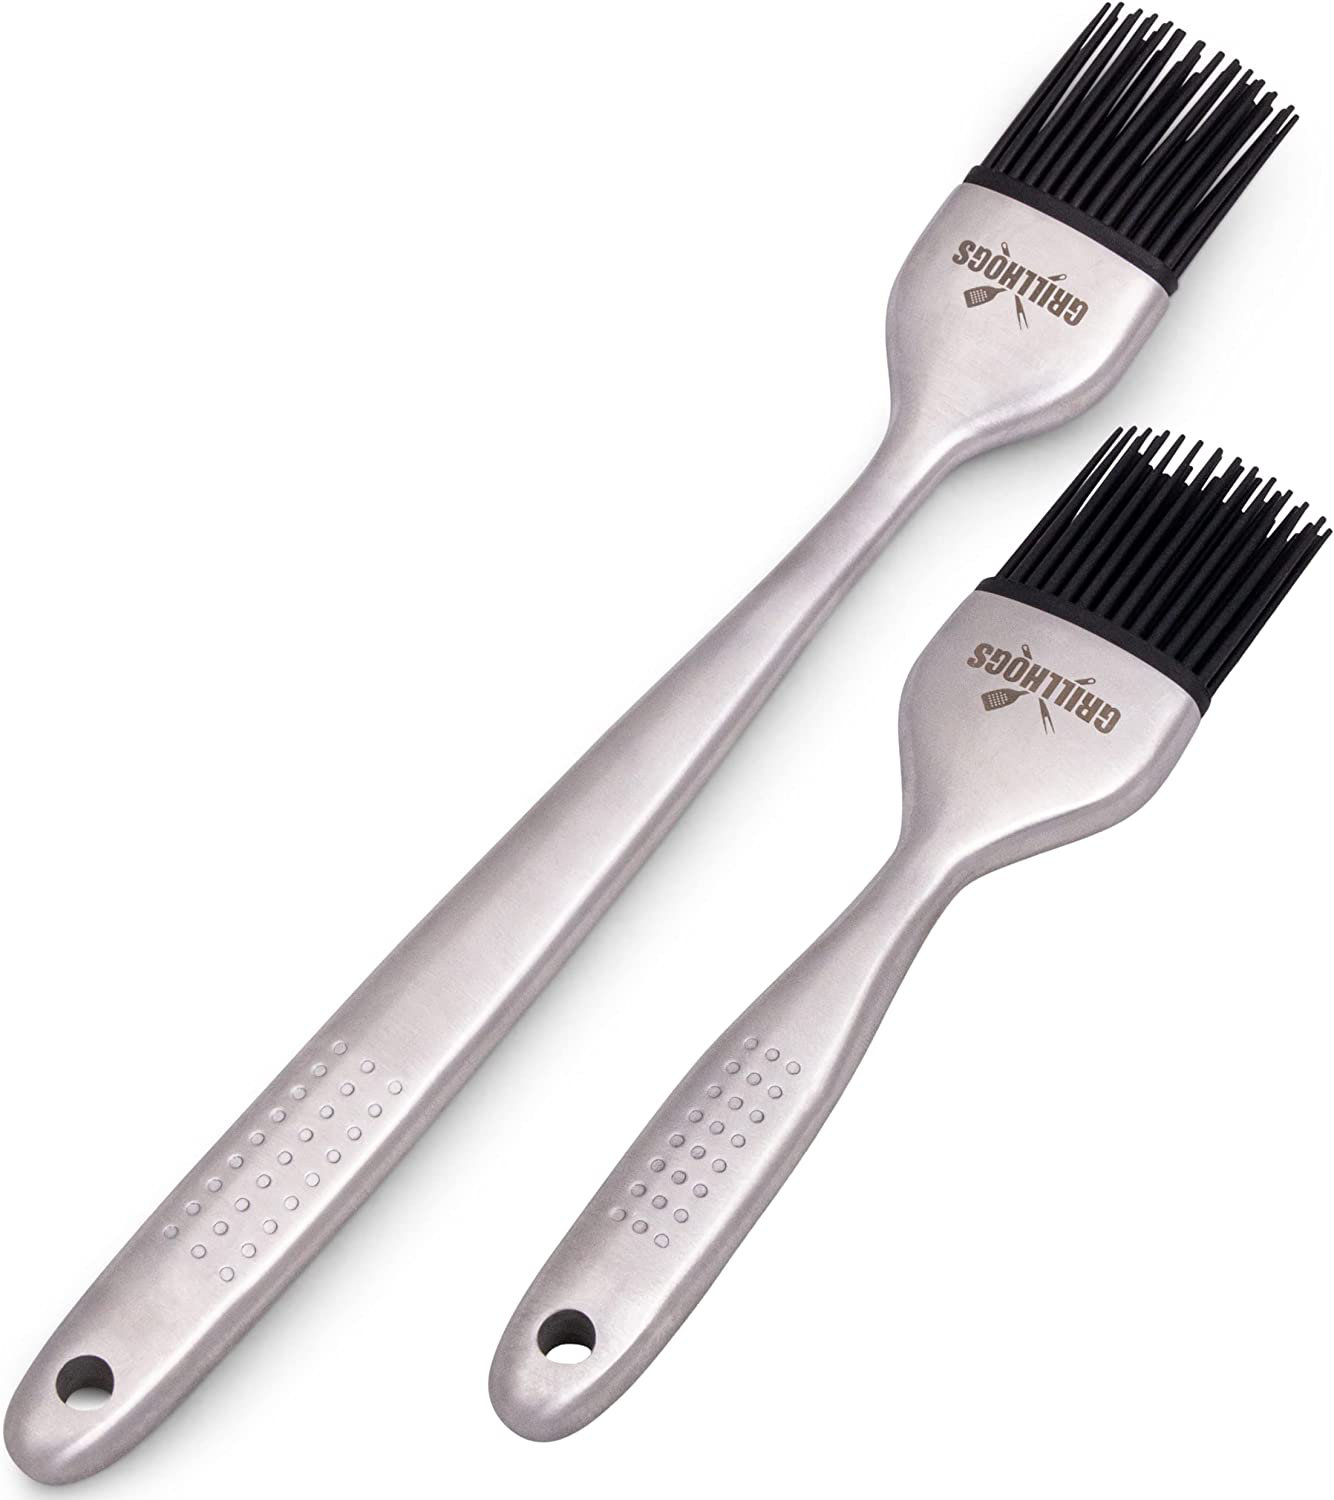 OXO Good Grips Silicone Basting & Pastry Brush - Large (2 Pack)